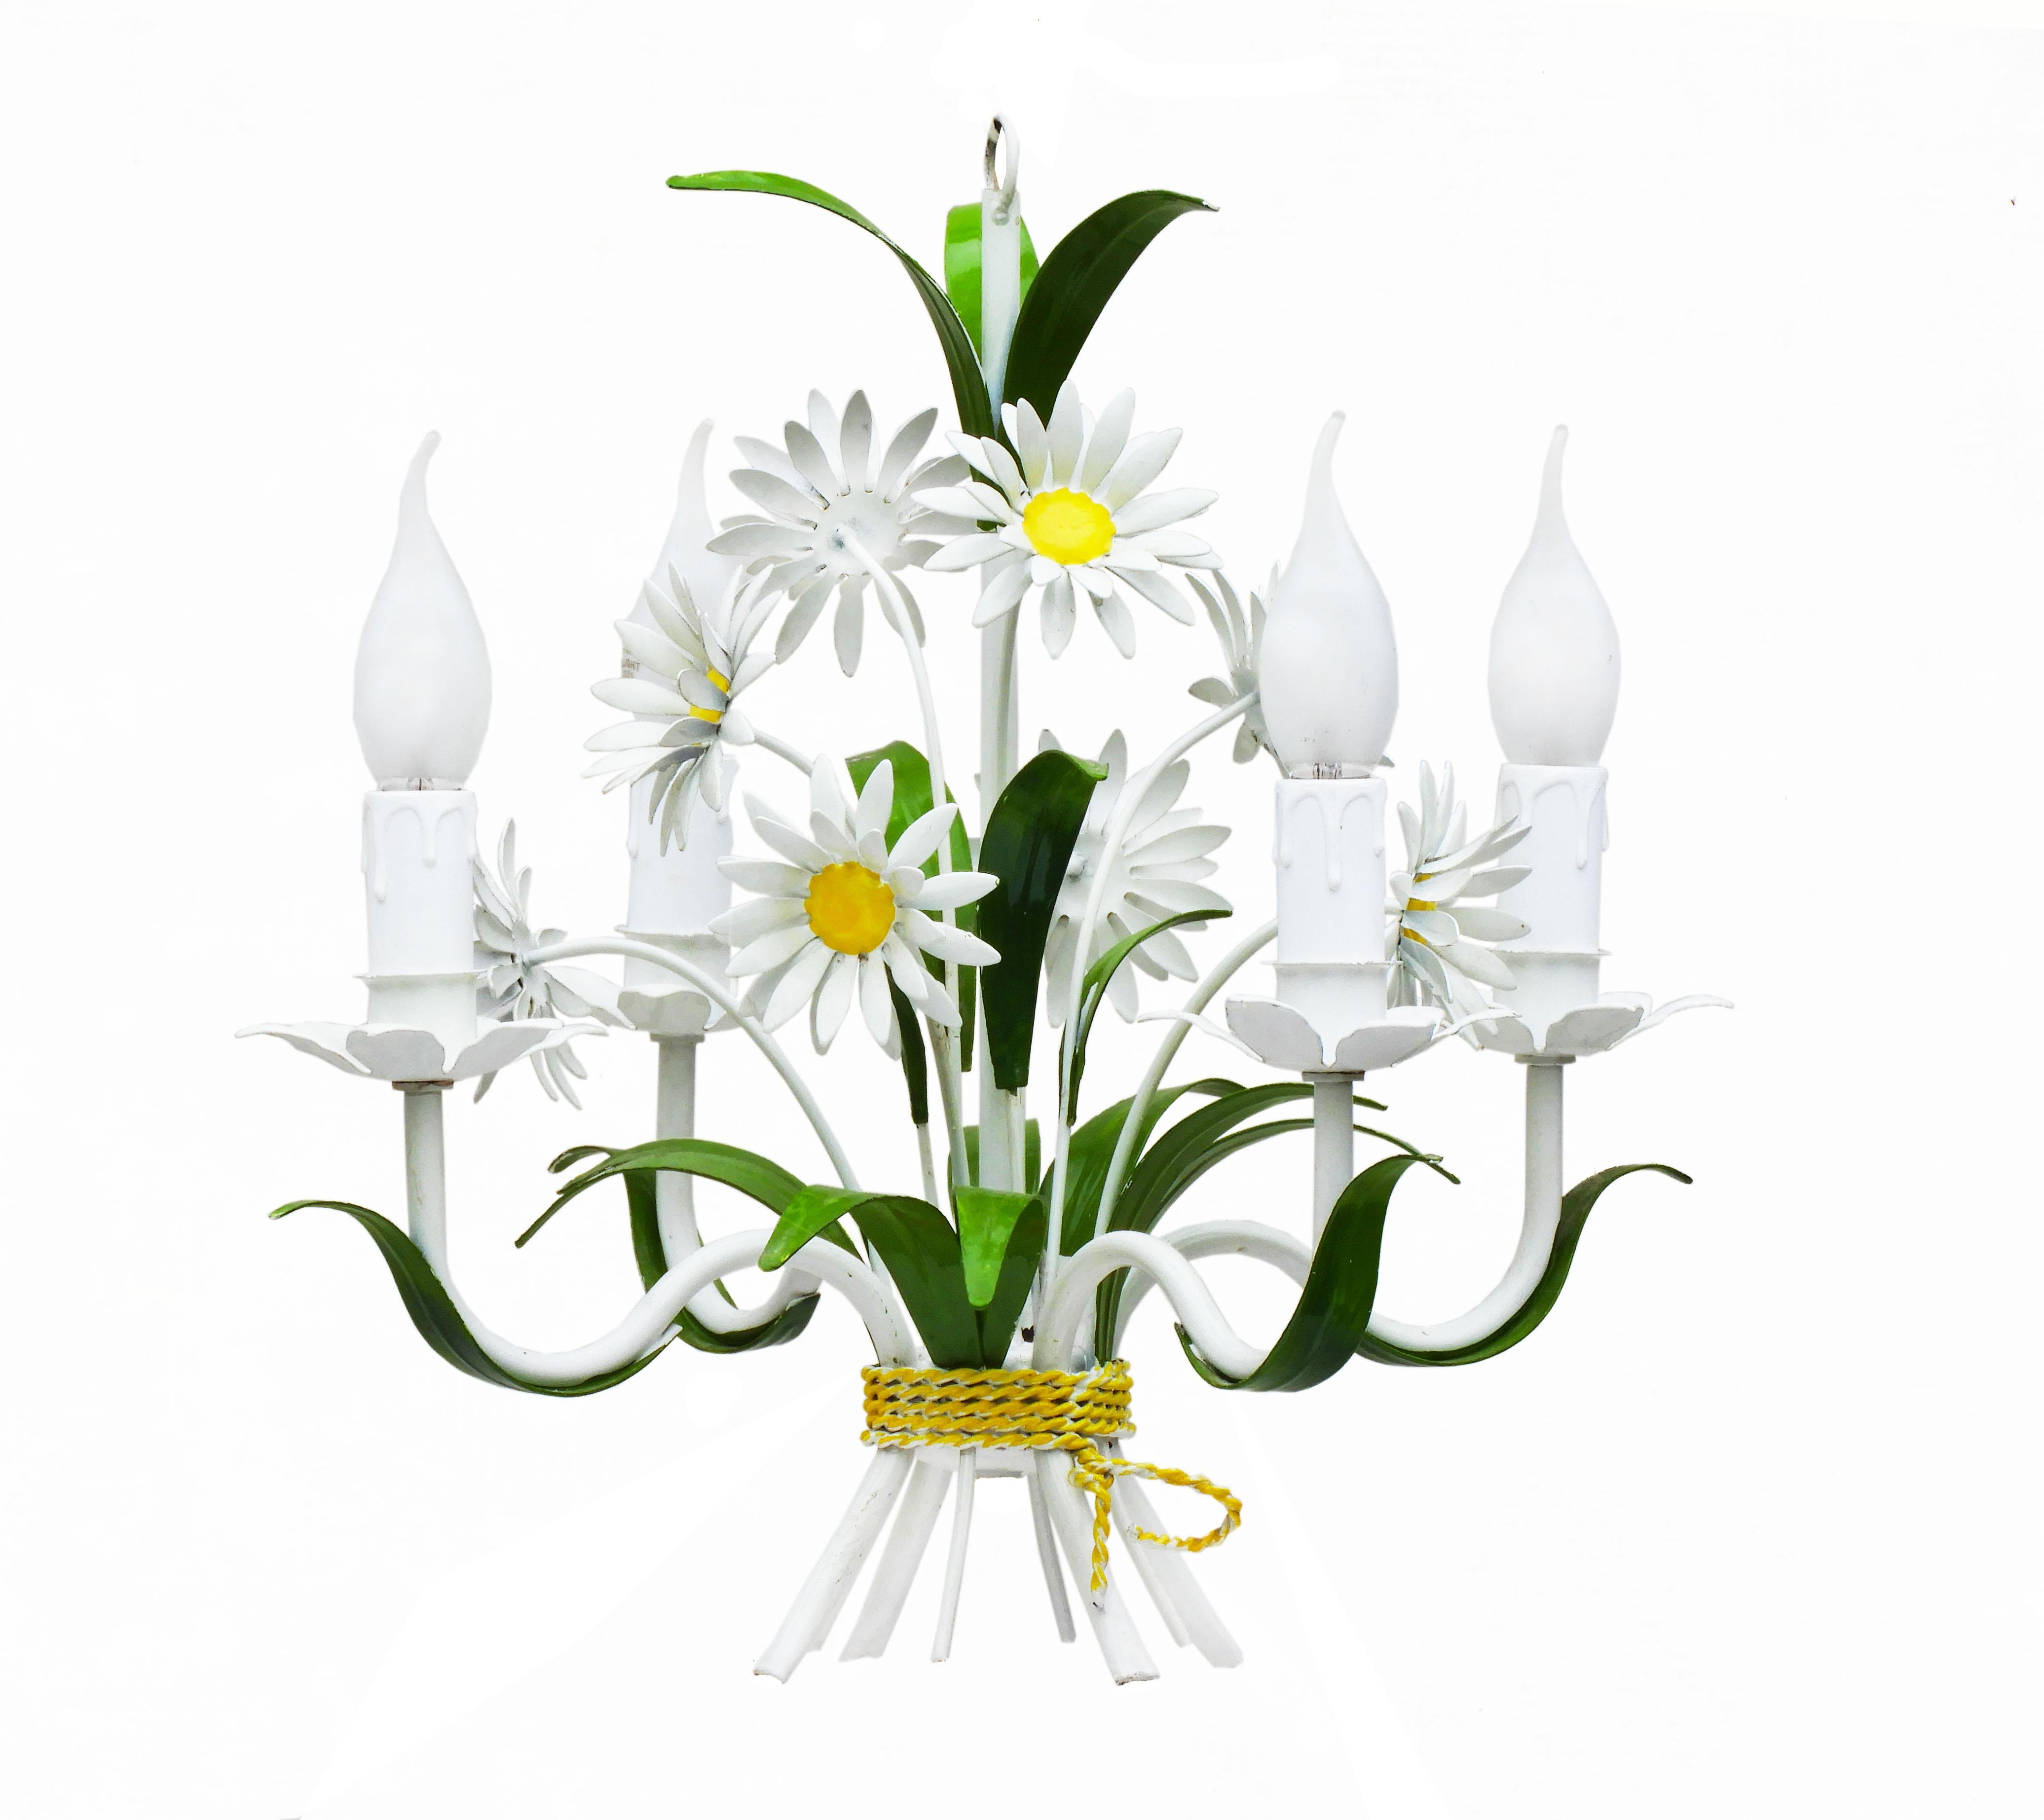 Charming floral 4 light chandelier C1960s France. 
Pretty white and yellow Marguerite Daisy blooms with glossy green foliage, tied off in a posy style bouquet. 
This simple but stylish Tôleware pendant light chandelier is in very good original